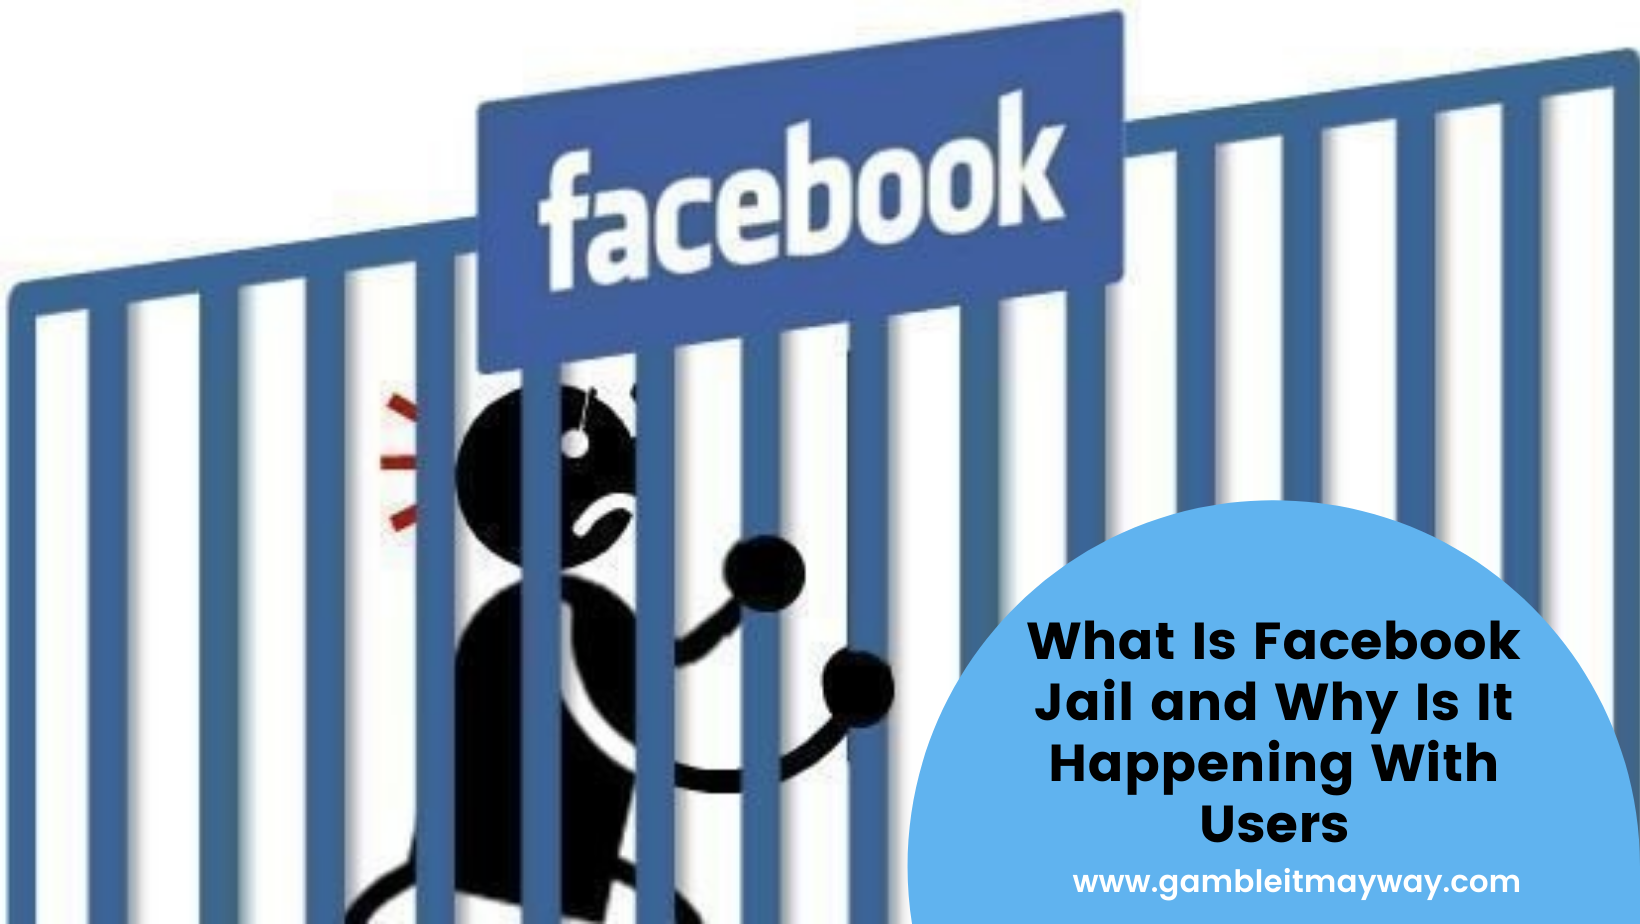 What Is Facebook Jail and Why Is It Happening With Users